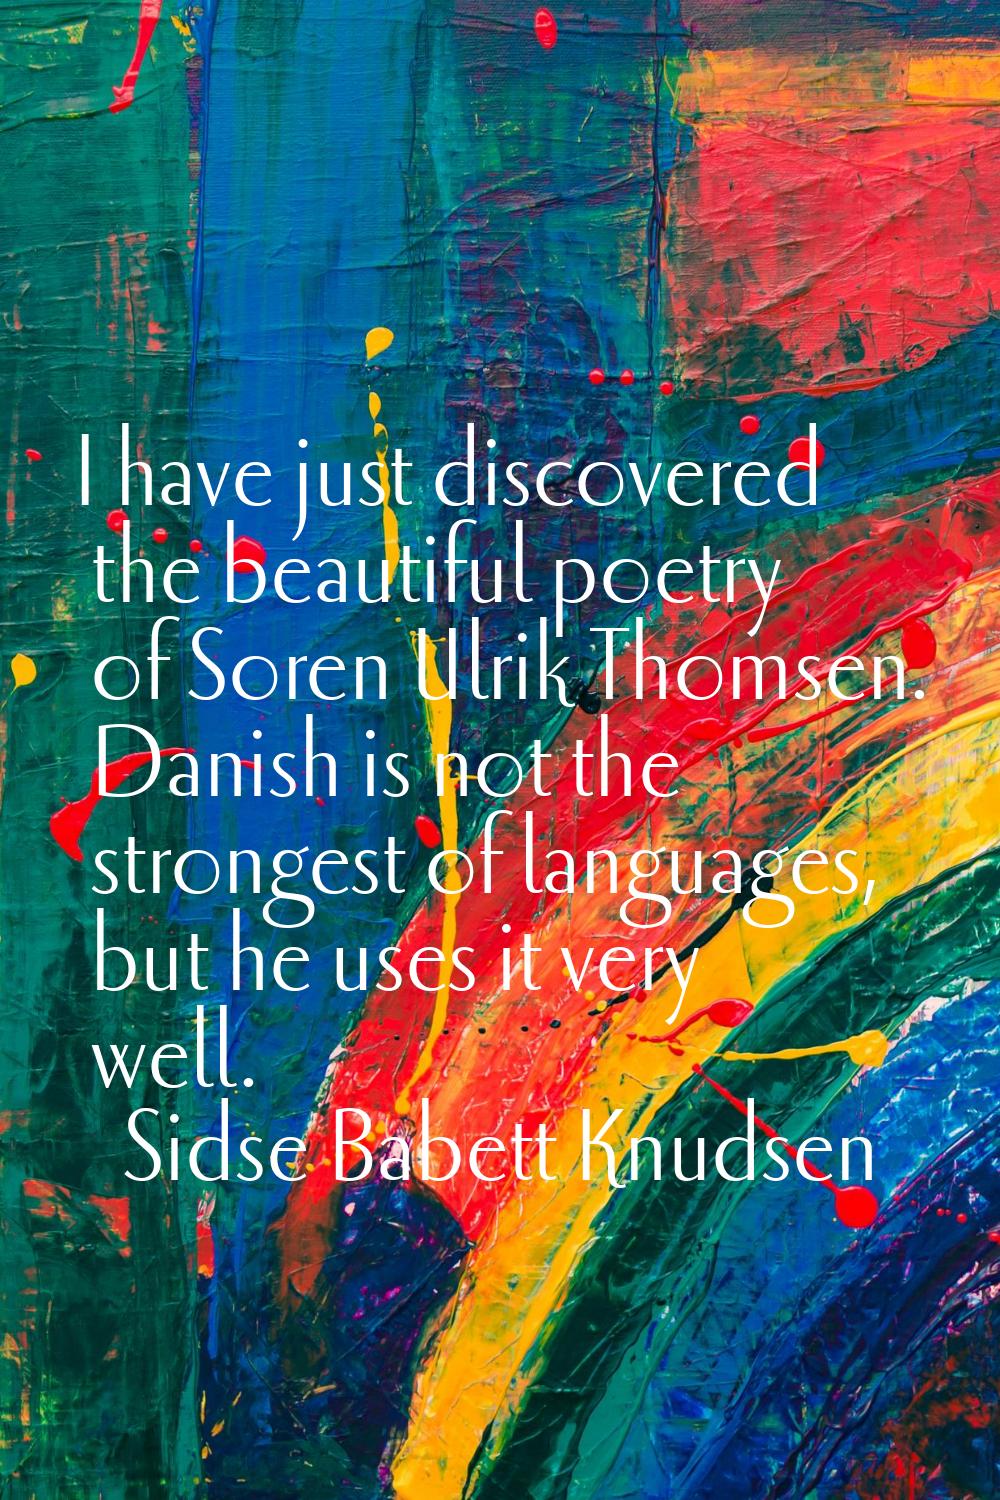 I have just discovered the beautiful poetry of Soren Ulrik Thomsen. Danish is not the strongest of 